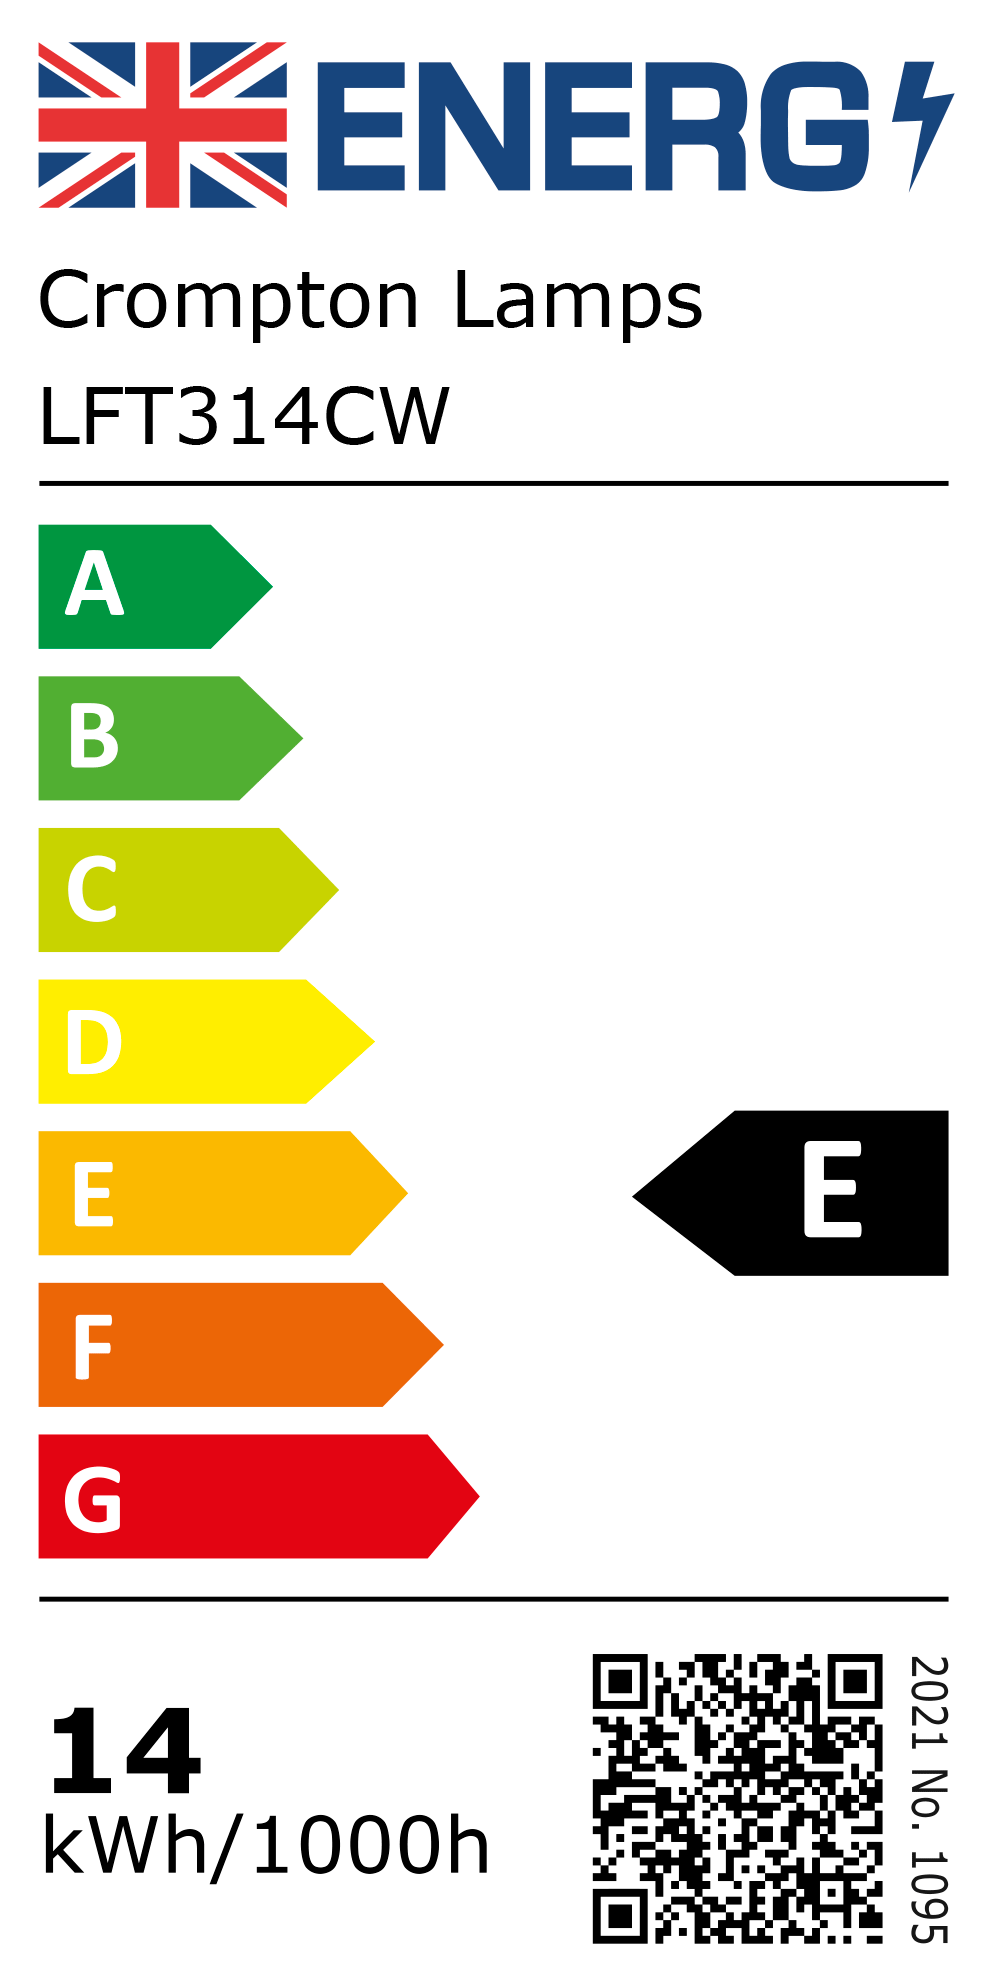 New 2021 Energy Rating Label: Stock Code LFT314CW